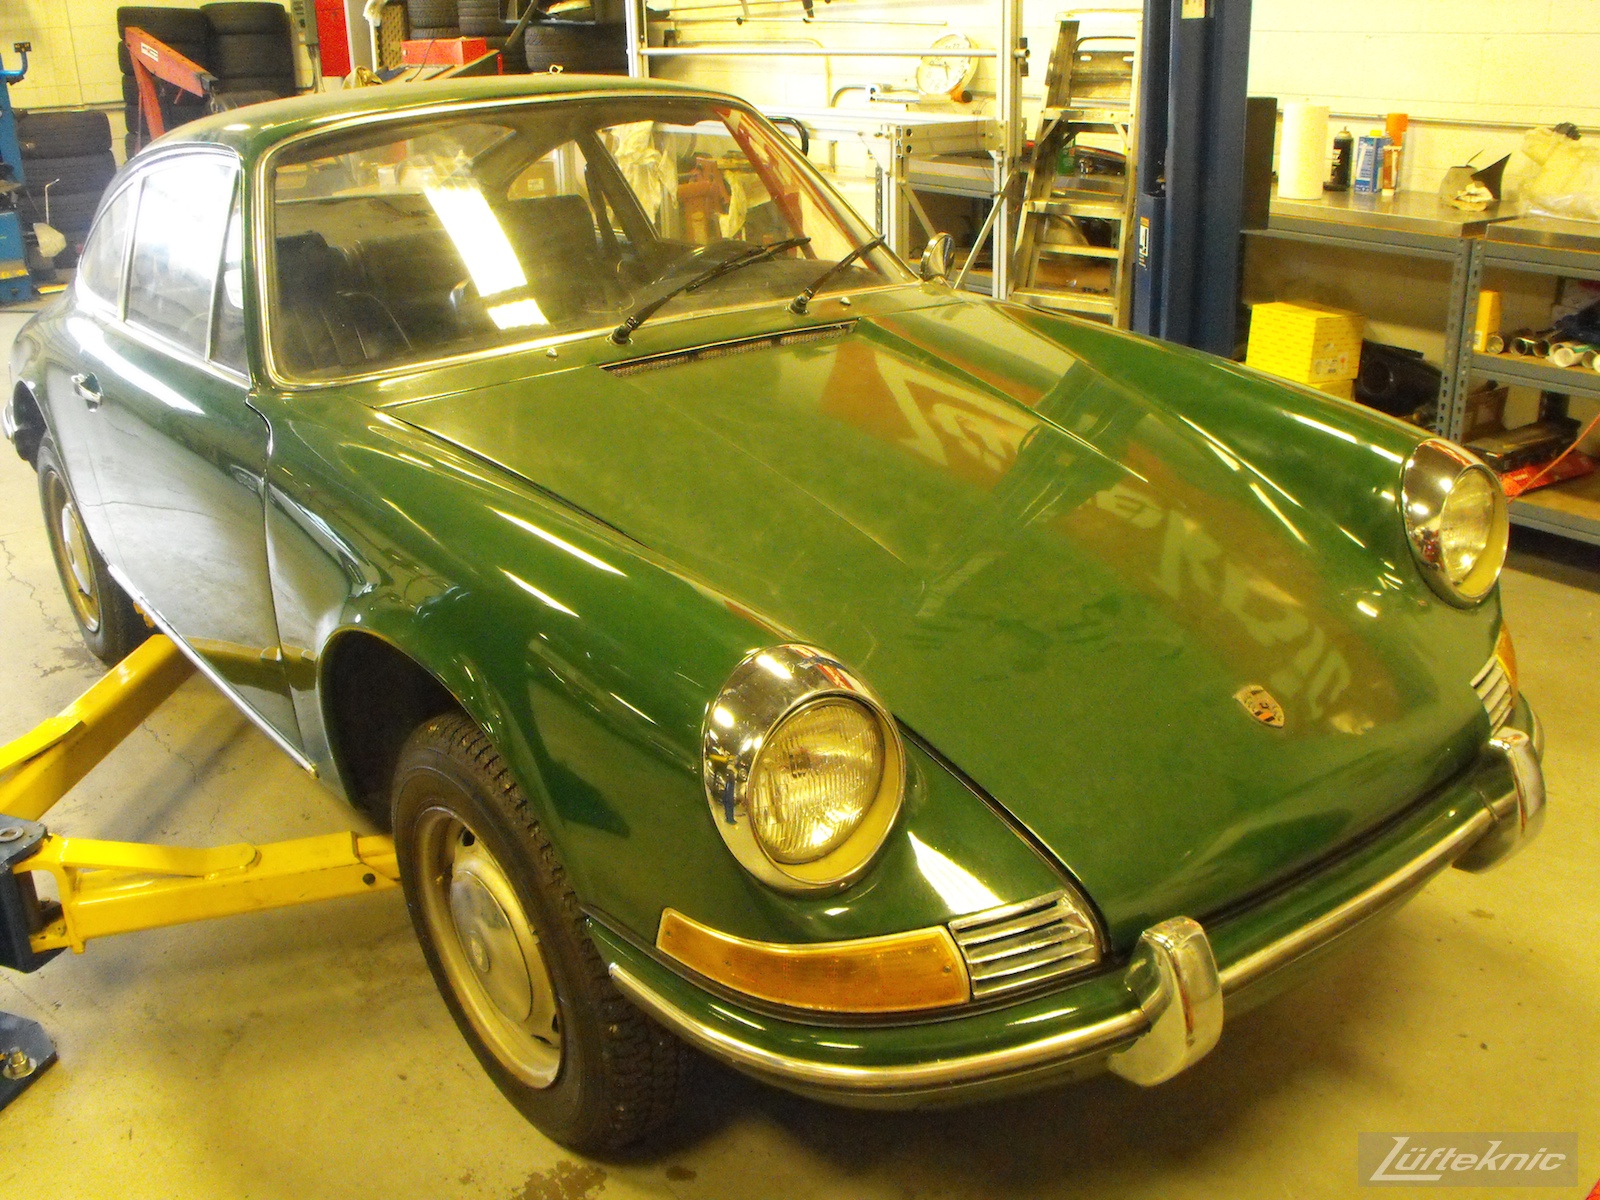 An Irish Green Porsche 912 undergoing restoration at Lufteknic with the car on a lift, showing original paint and trim.